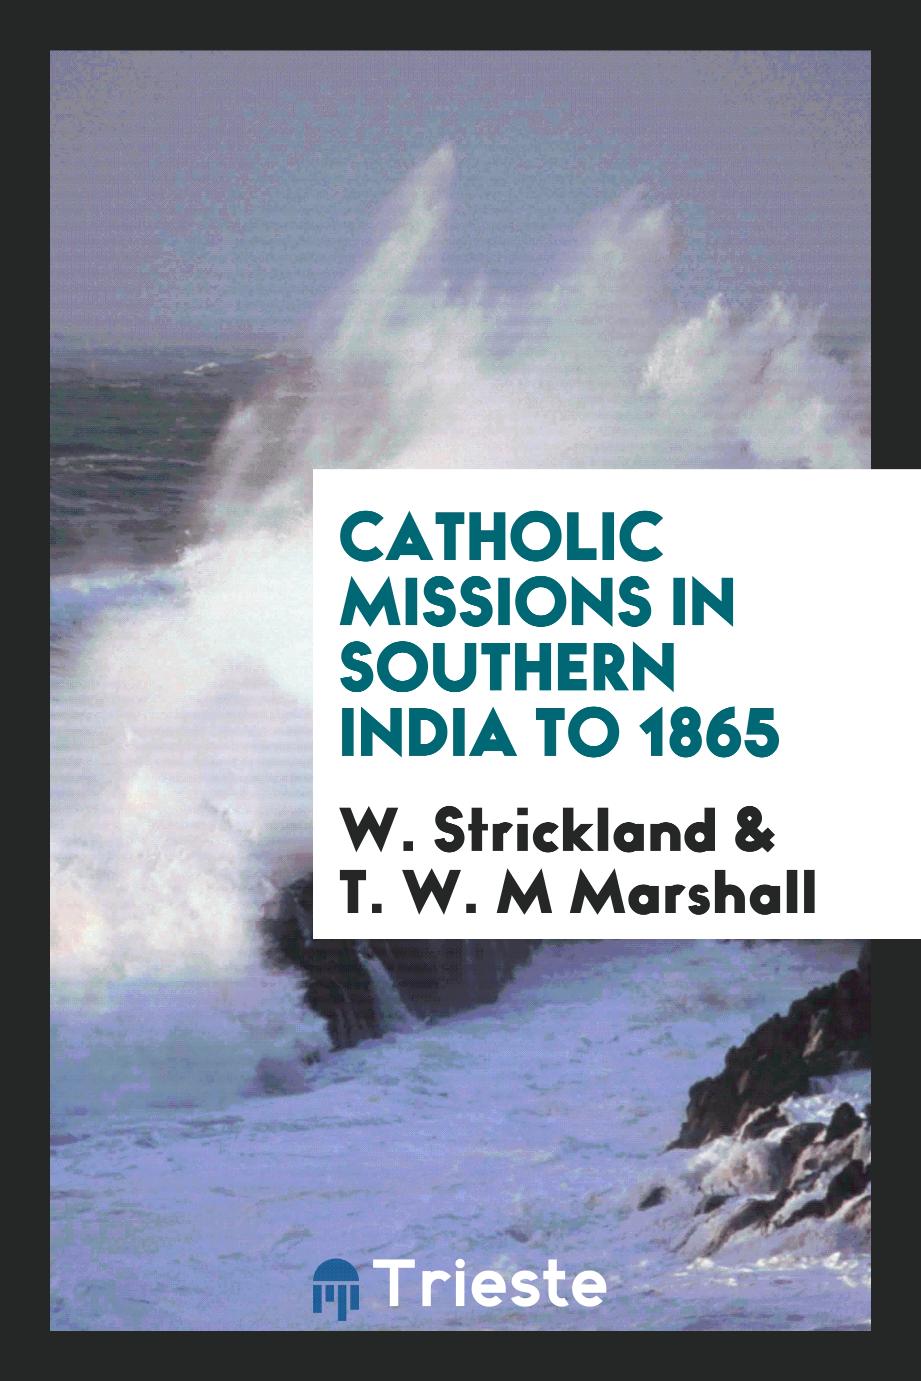 Catholic missions in southern India to 1865